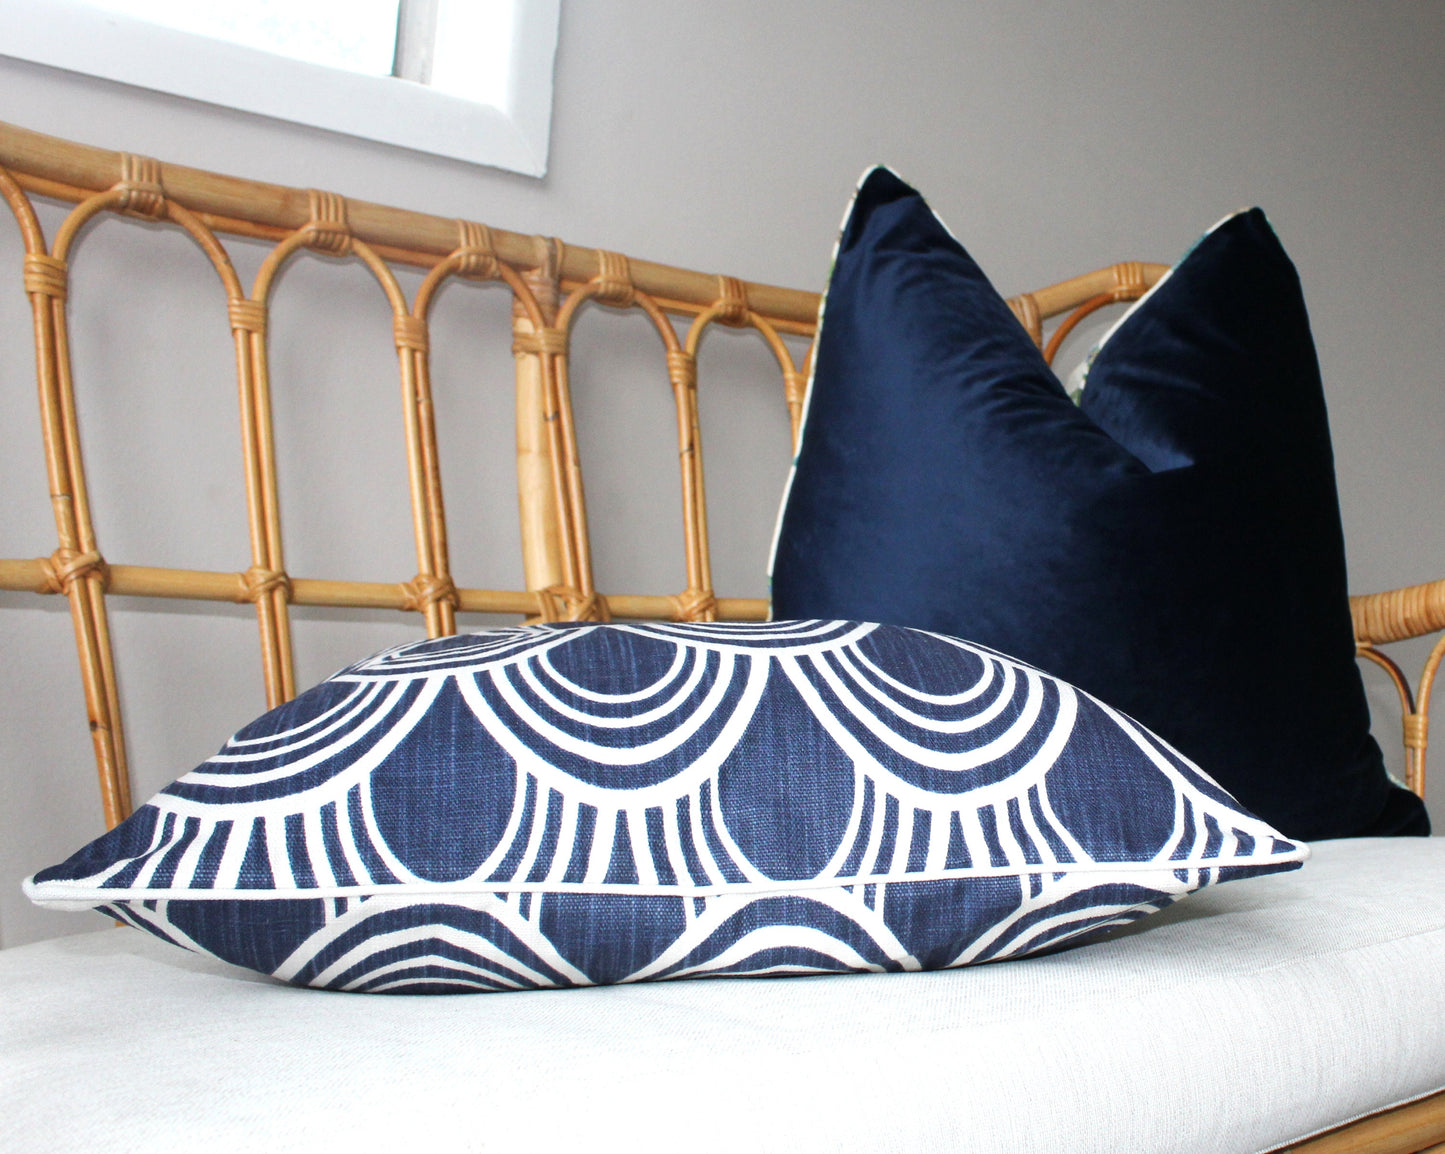 Rotary pattern cushion cover